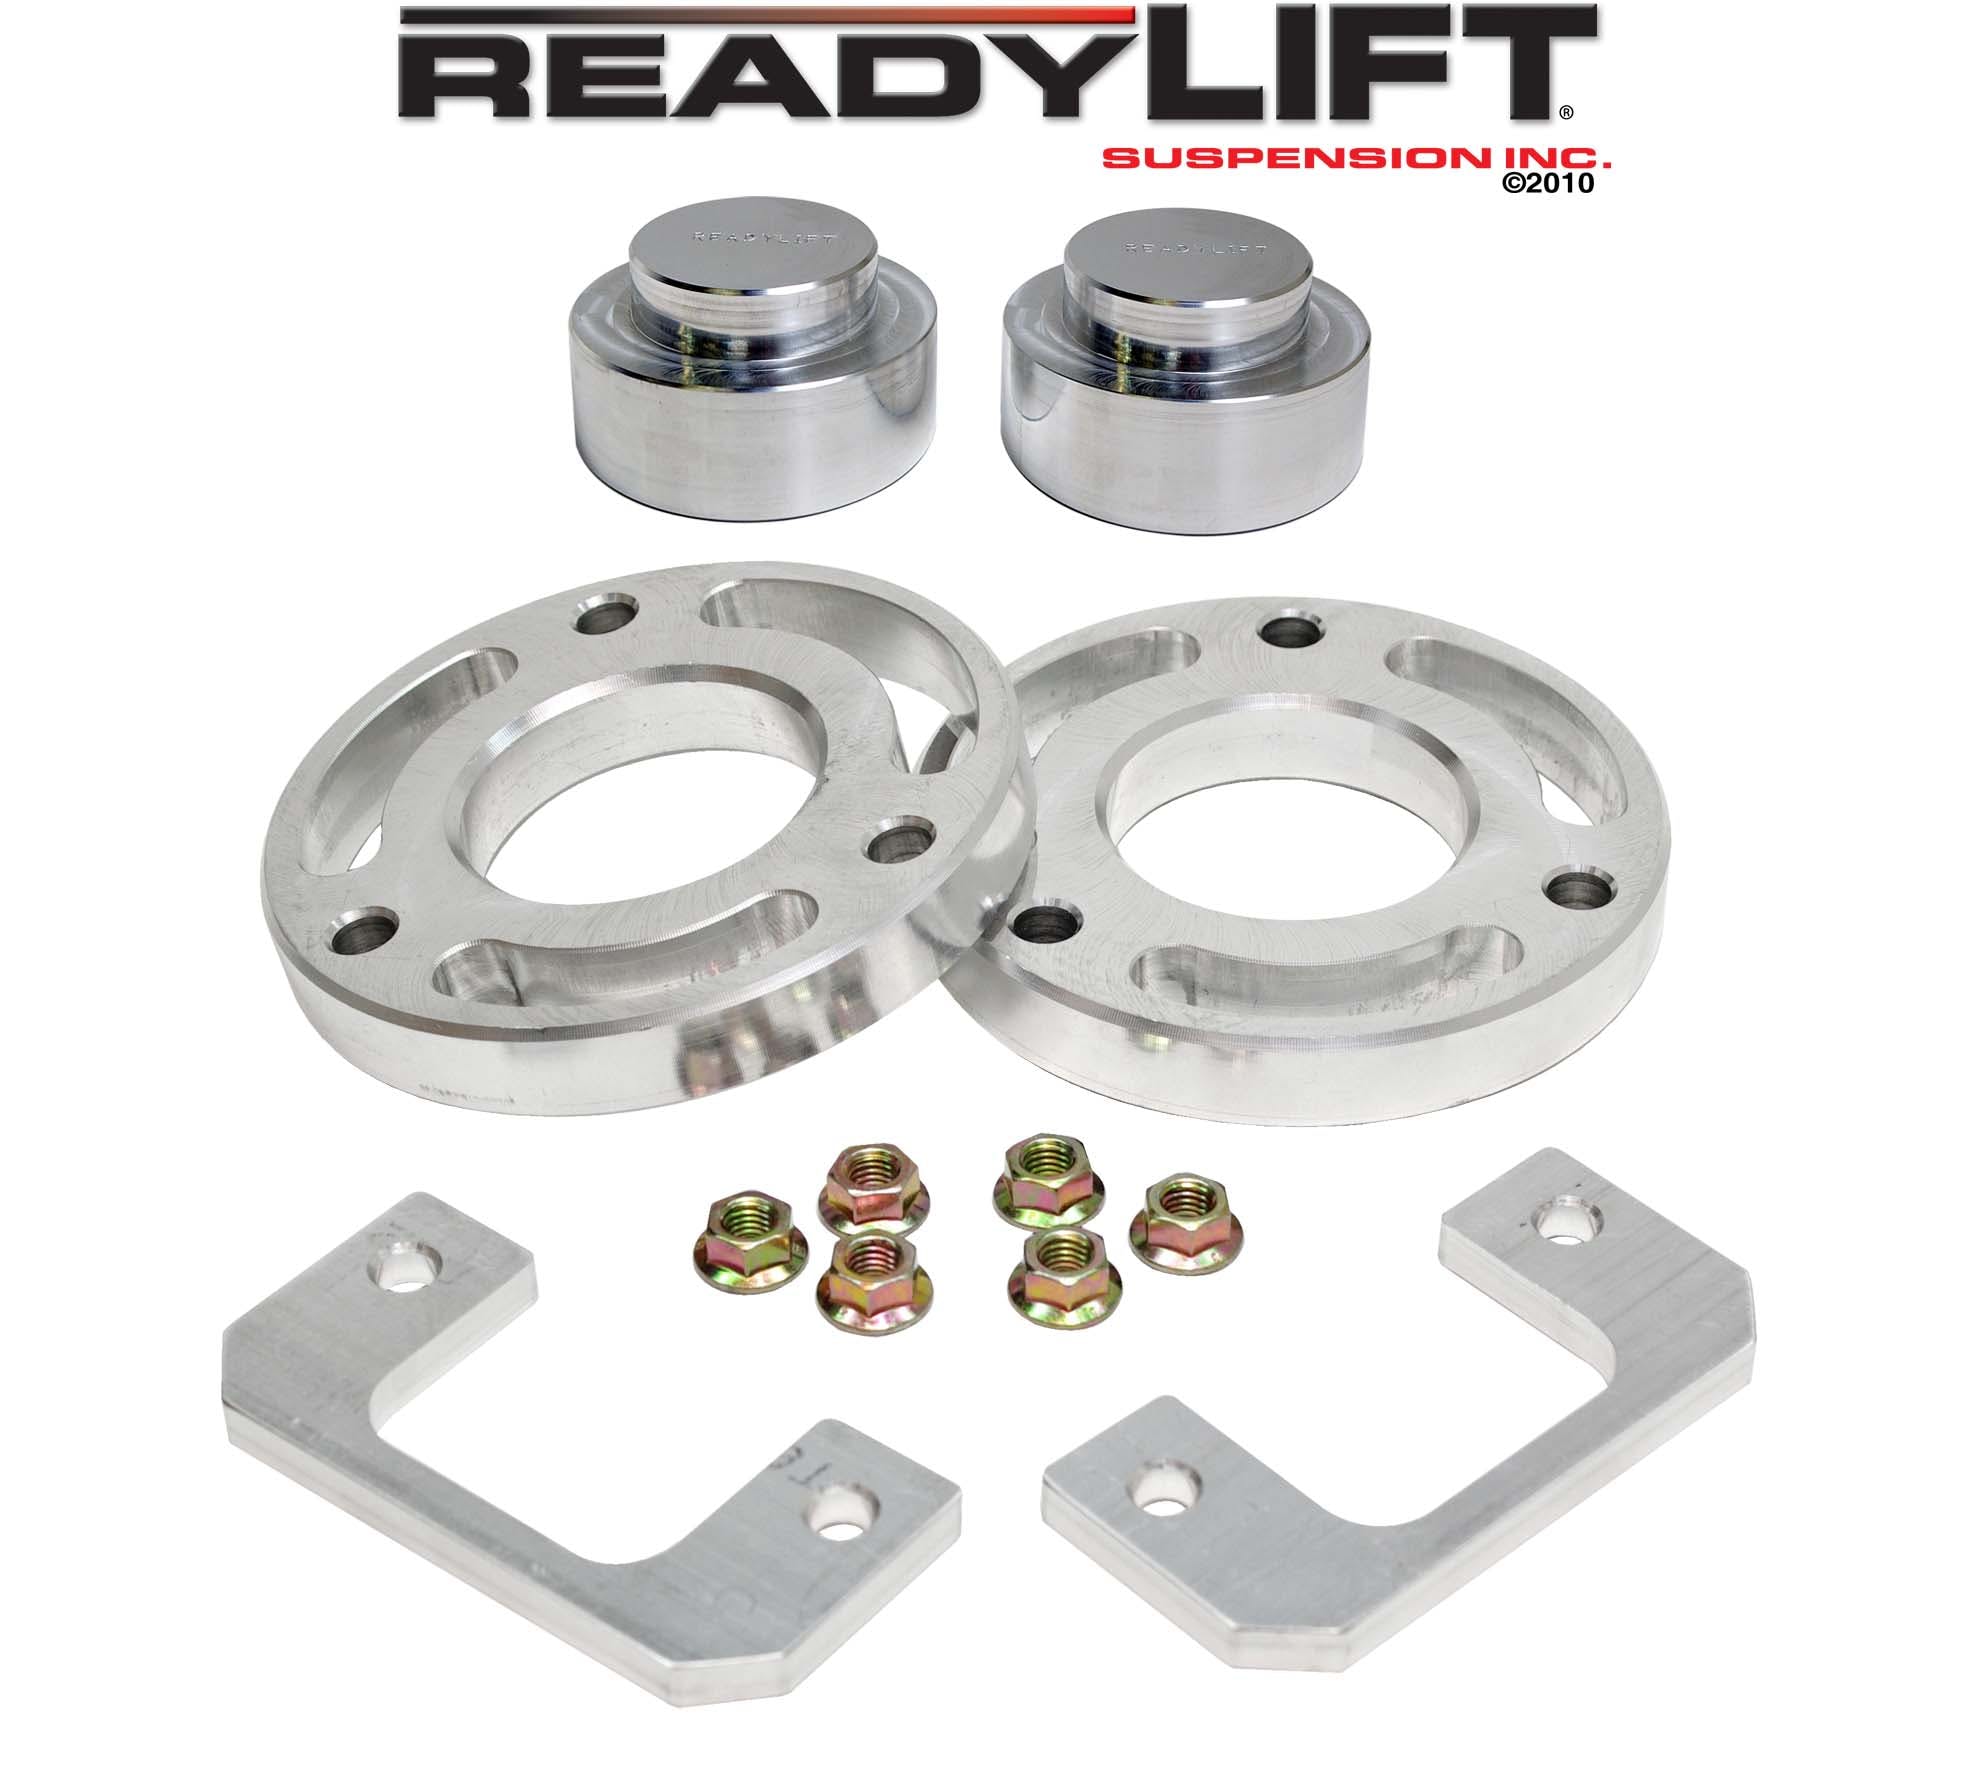 ReadyLIFT 69-3015 2.25" Front with 1.5" Rear SST Lift Kit